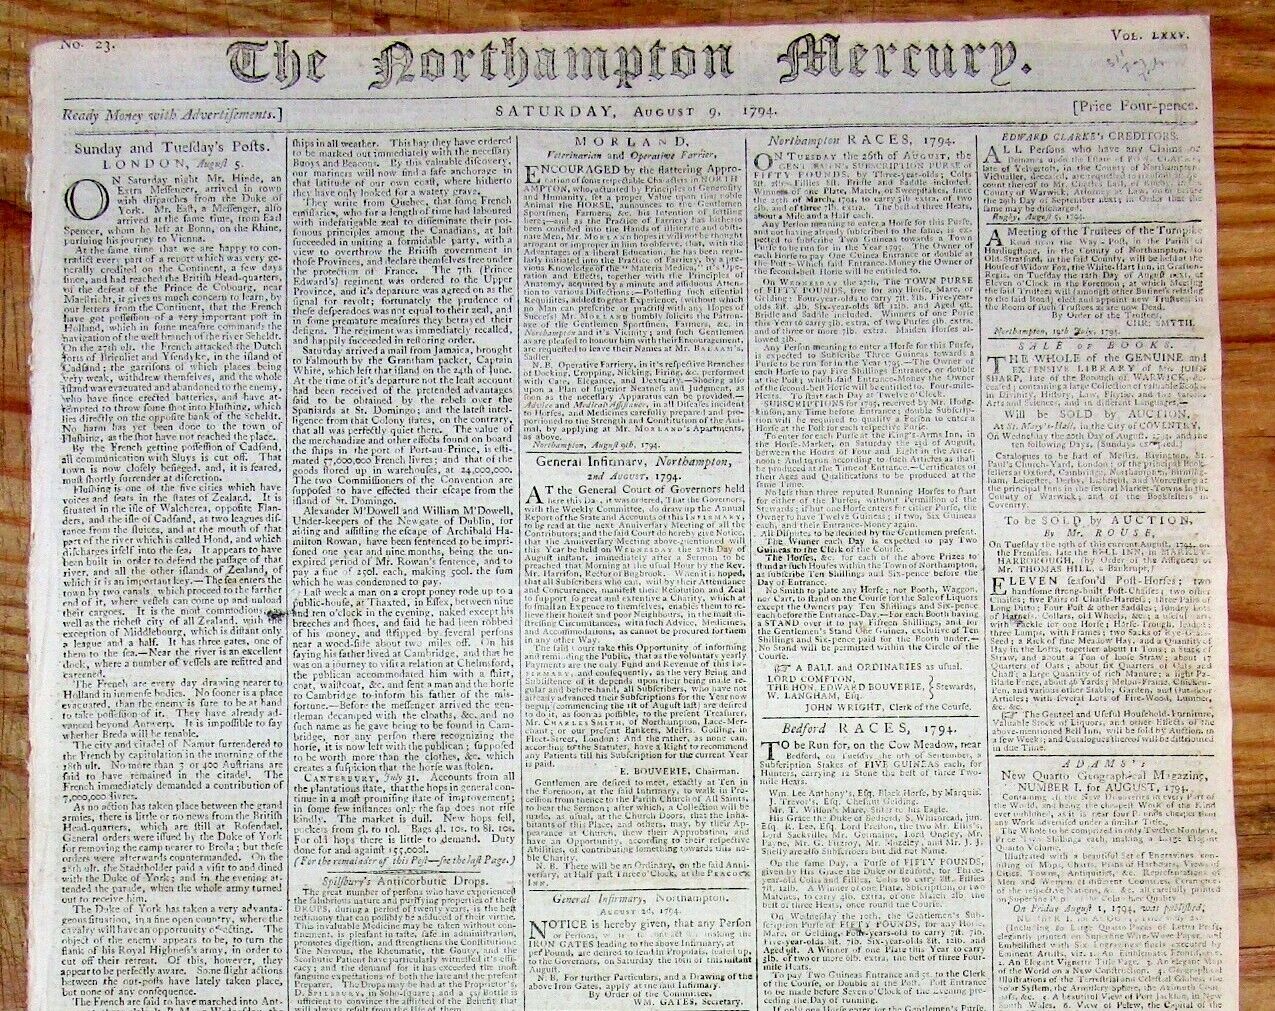 1794 newspaper with early news of THE JAY TREATY between the US & GREAT BRITAIN